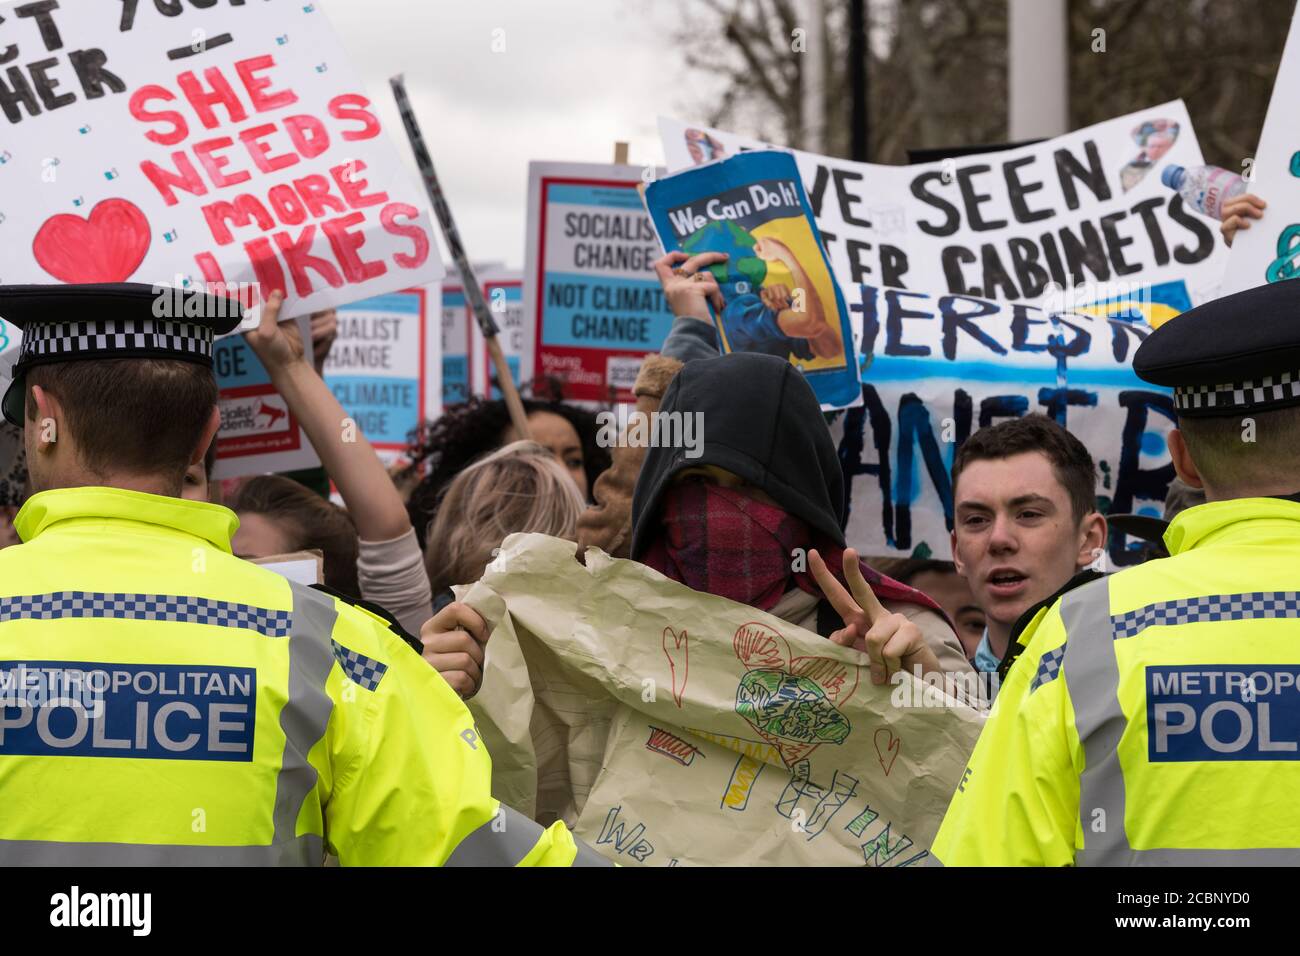 London, UK - Mar 15, 2019: Kids on strike from school. The Metropolitan Police holding them back from overrunning the Mall and Victoria statue. Stock Photo